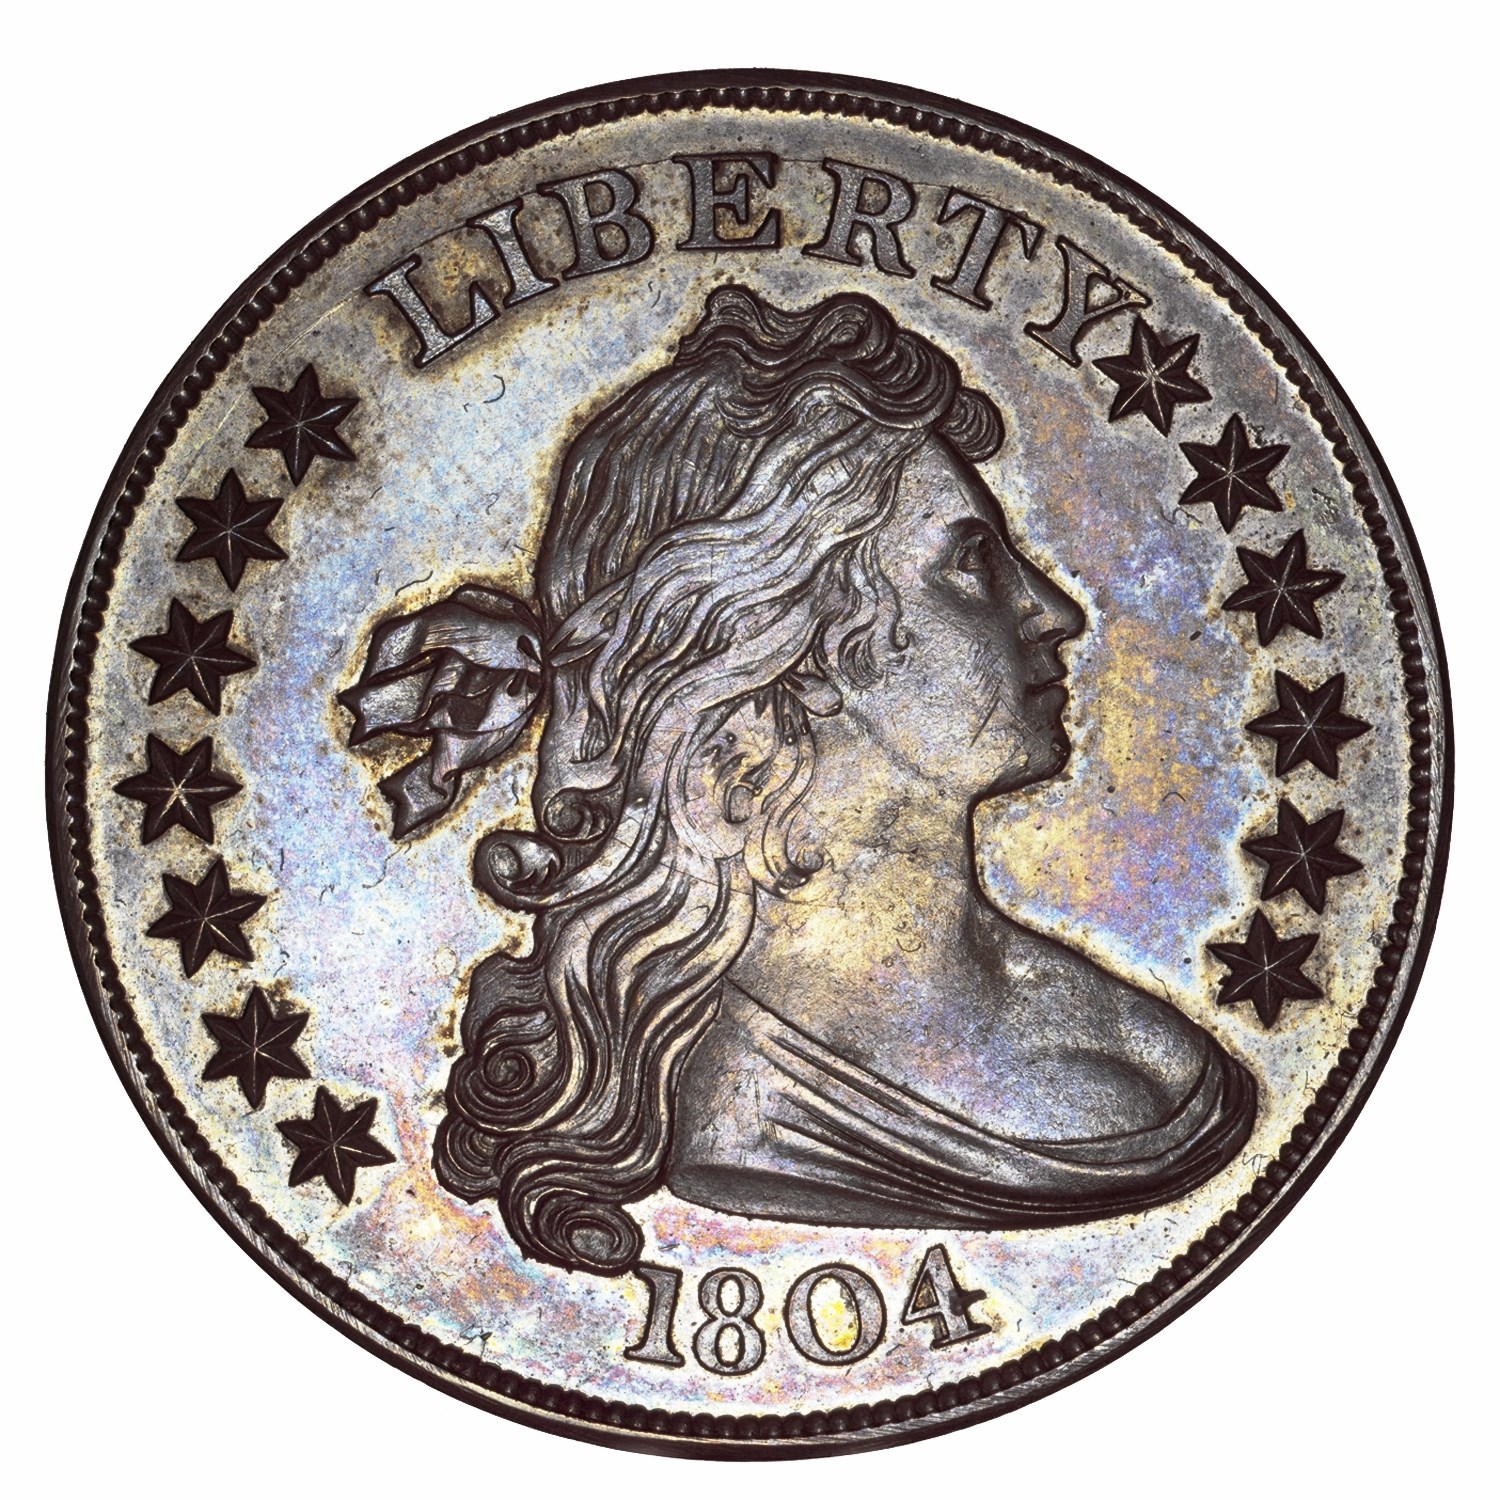 The September 2013 Long Beach Expo will feature a multi-million dollar exhibit of rare coins and paper money from the American Numismatic Association Money Museum in Colorado, including two historic 1804 U.S. silver dollars.